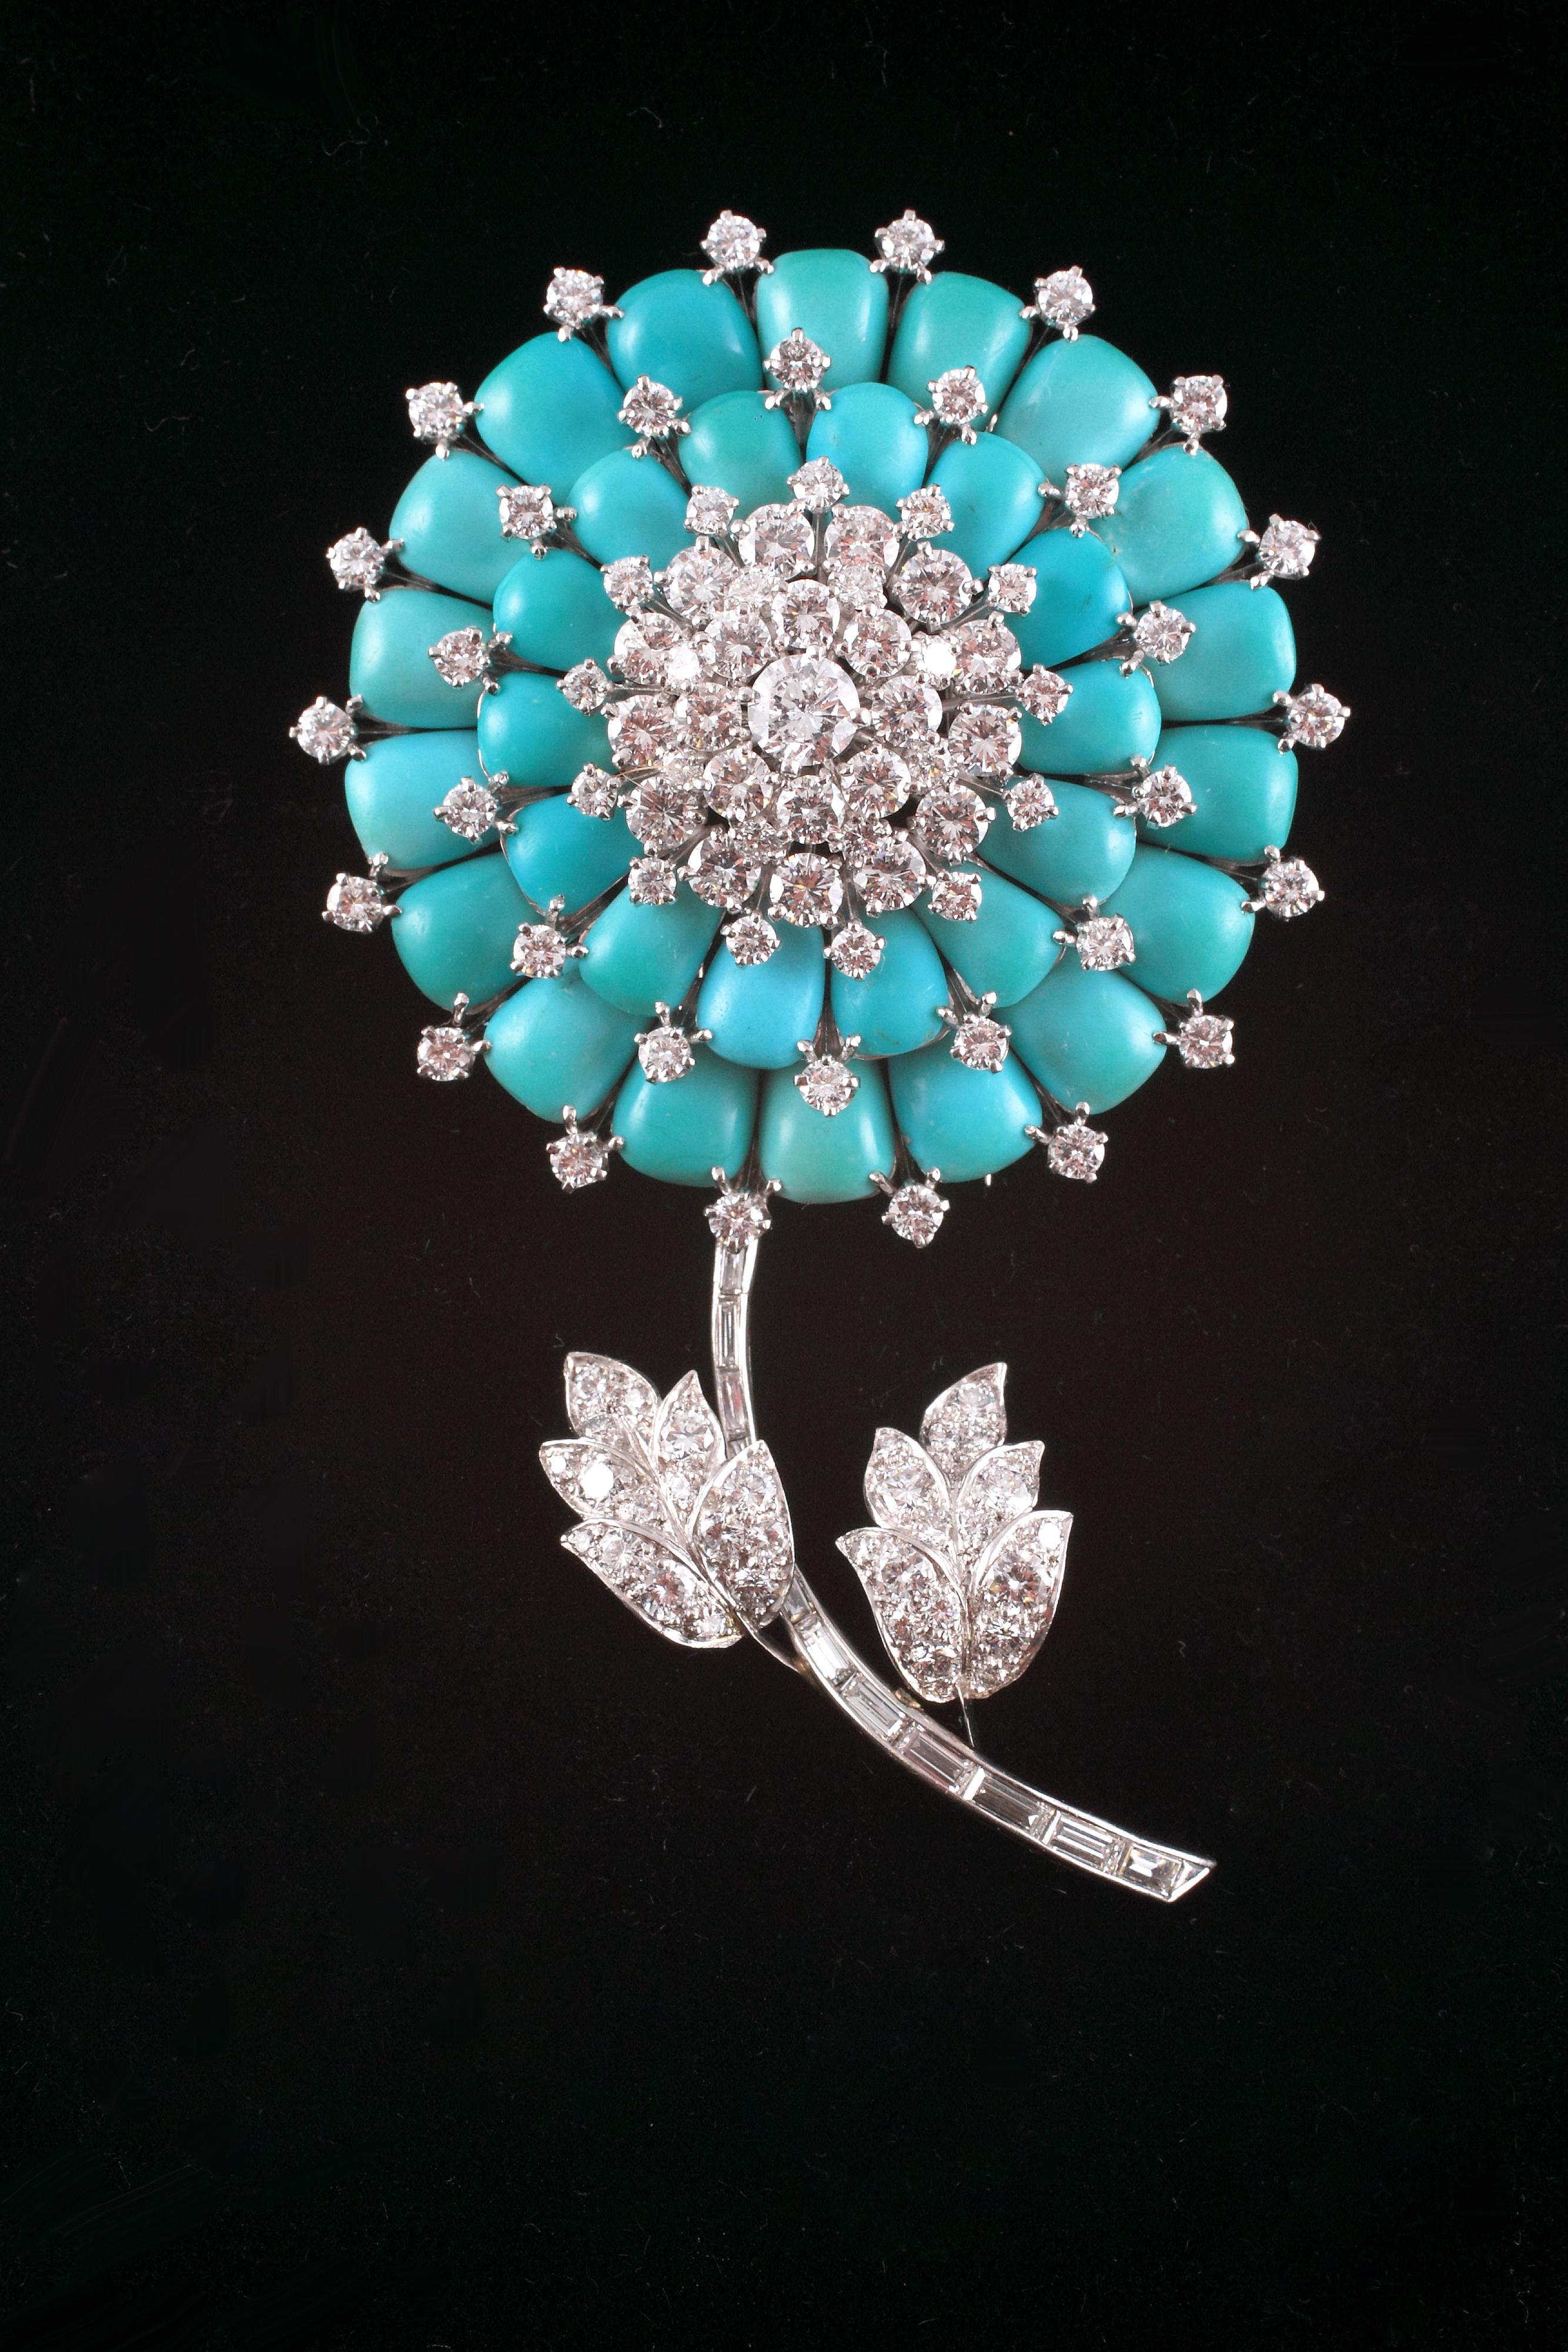 This brooch is absolutely stunning!  Composed of a handmade, platinum mounting, this beauty is accompanied by Certificate of Authenticity from Oscar Heyman, dated November 14, 2018.  The eighteen turquoise petals are beautifully matched and support